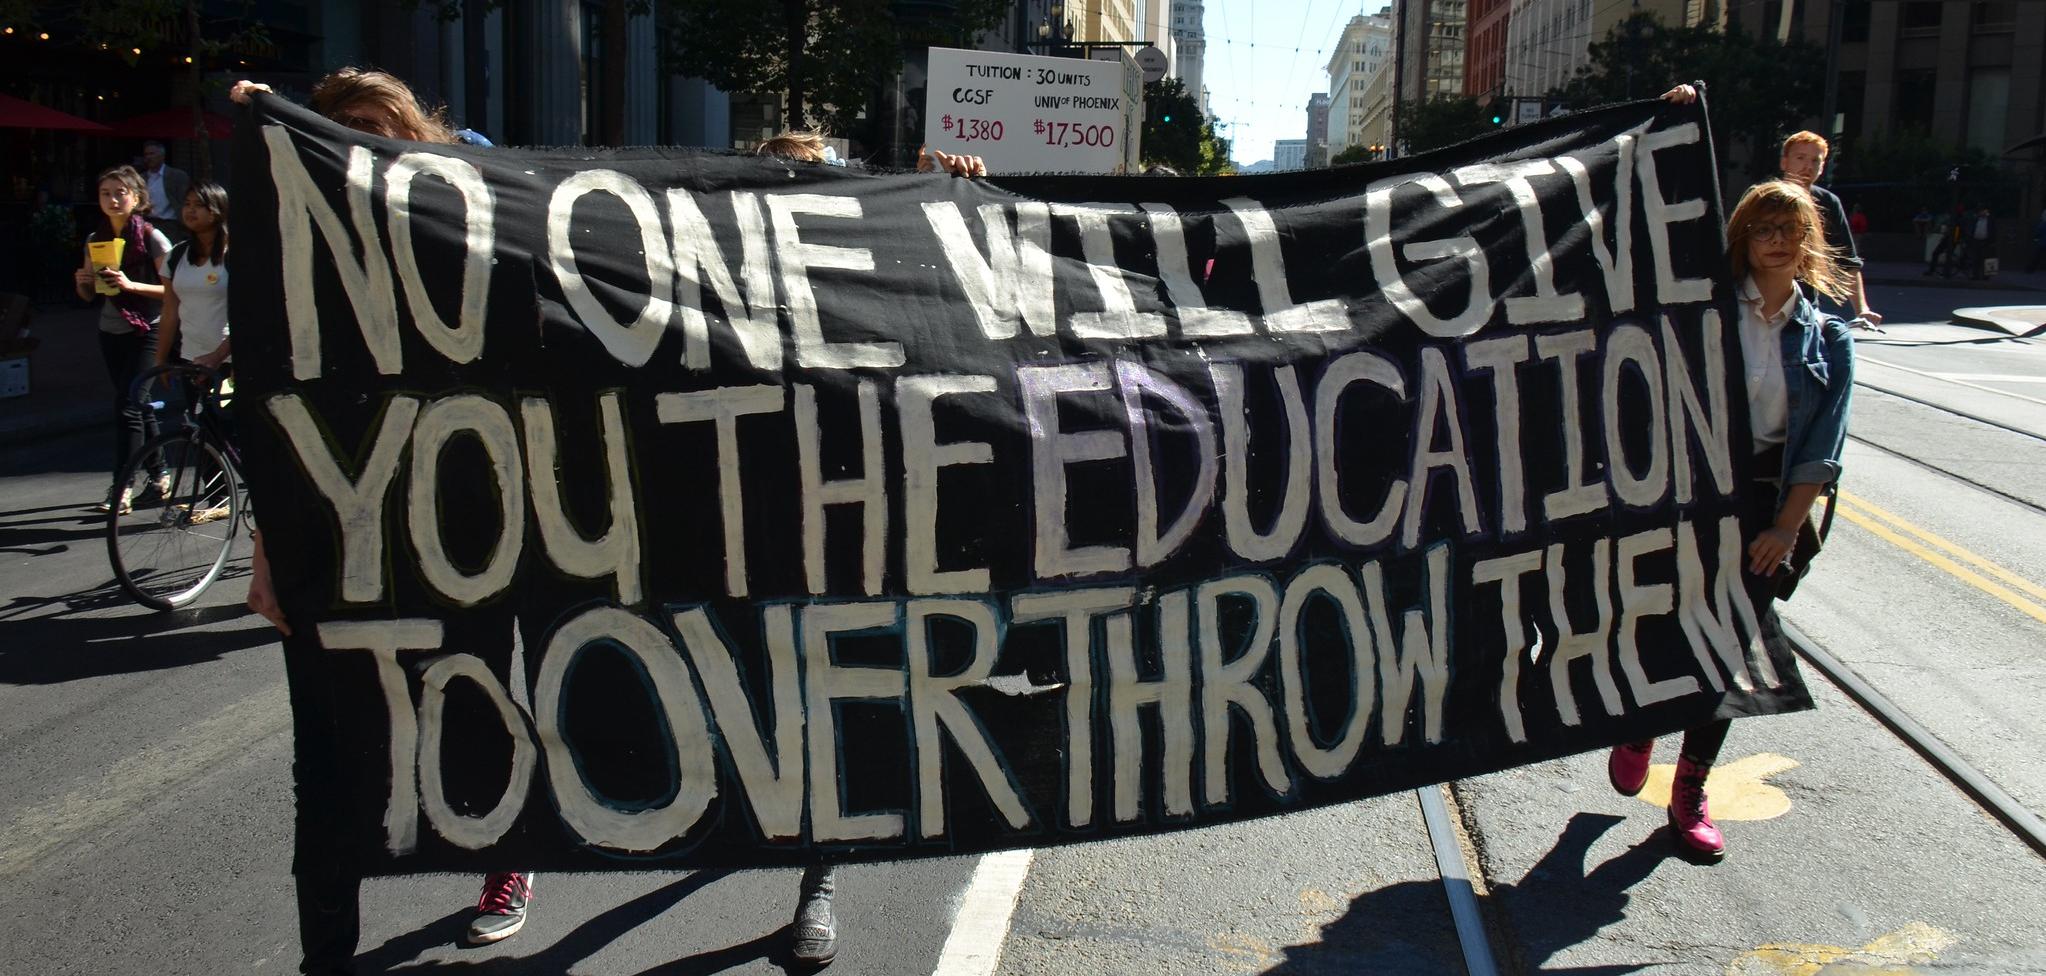 Protesters holding a banner that reads: No one will give you the education to overthrow them